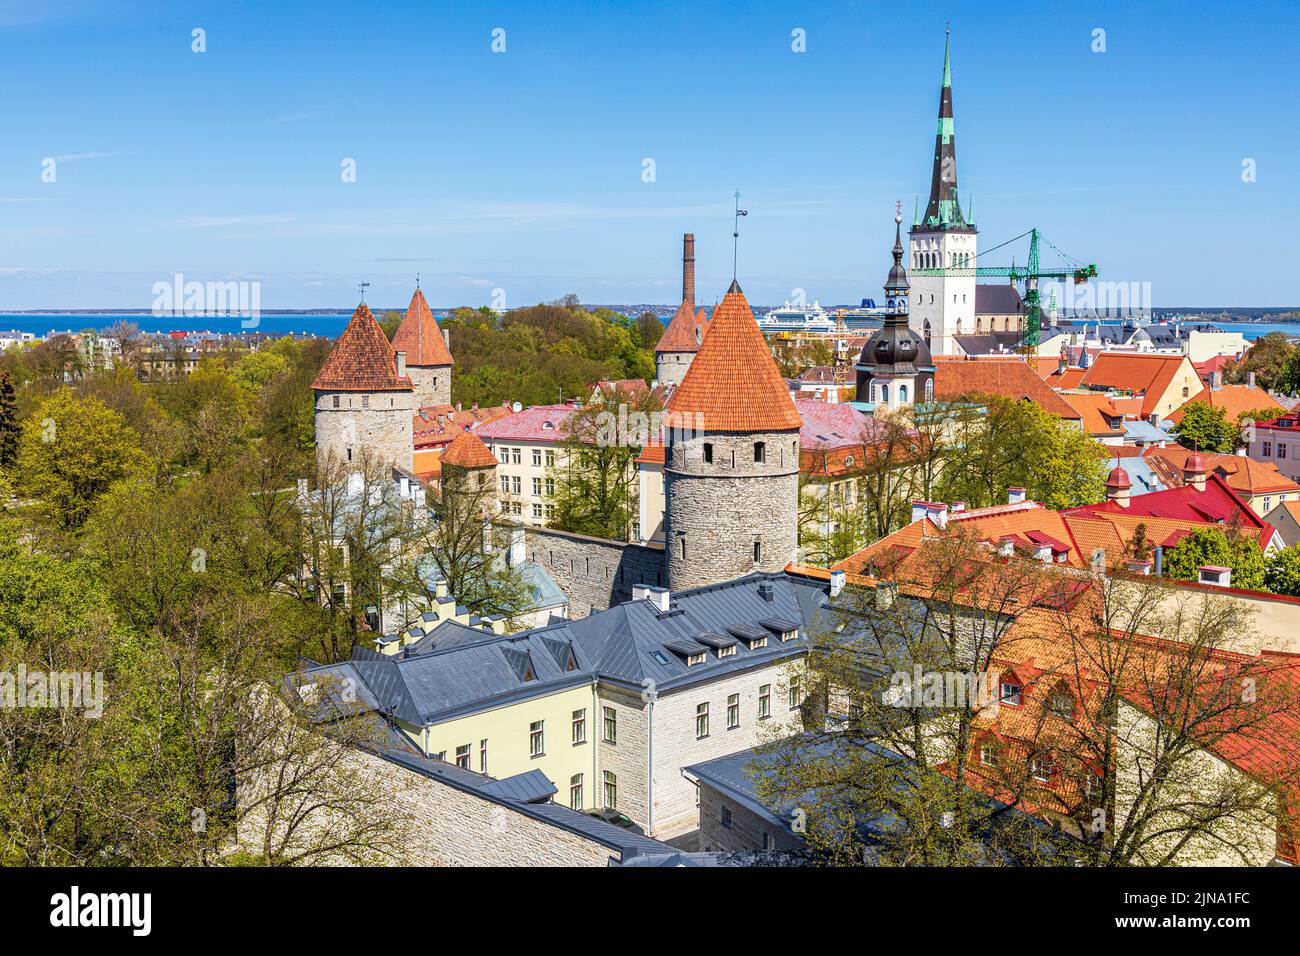 Looking out from the Upper Town over the rooves of the old town of Tallinn the capital city of Estonia Stock Photo